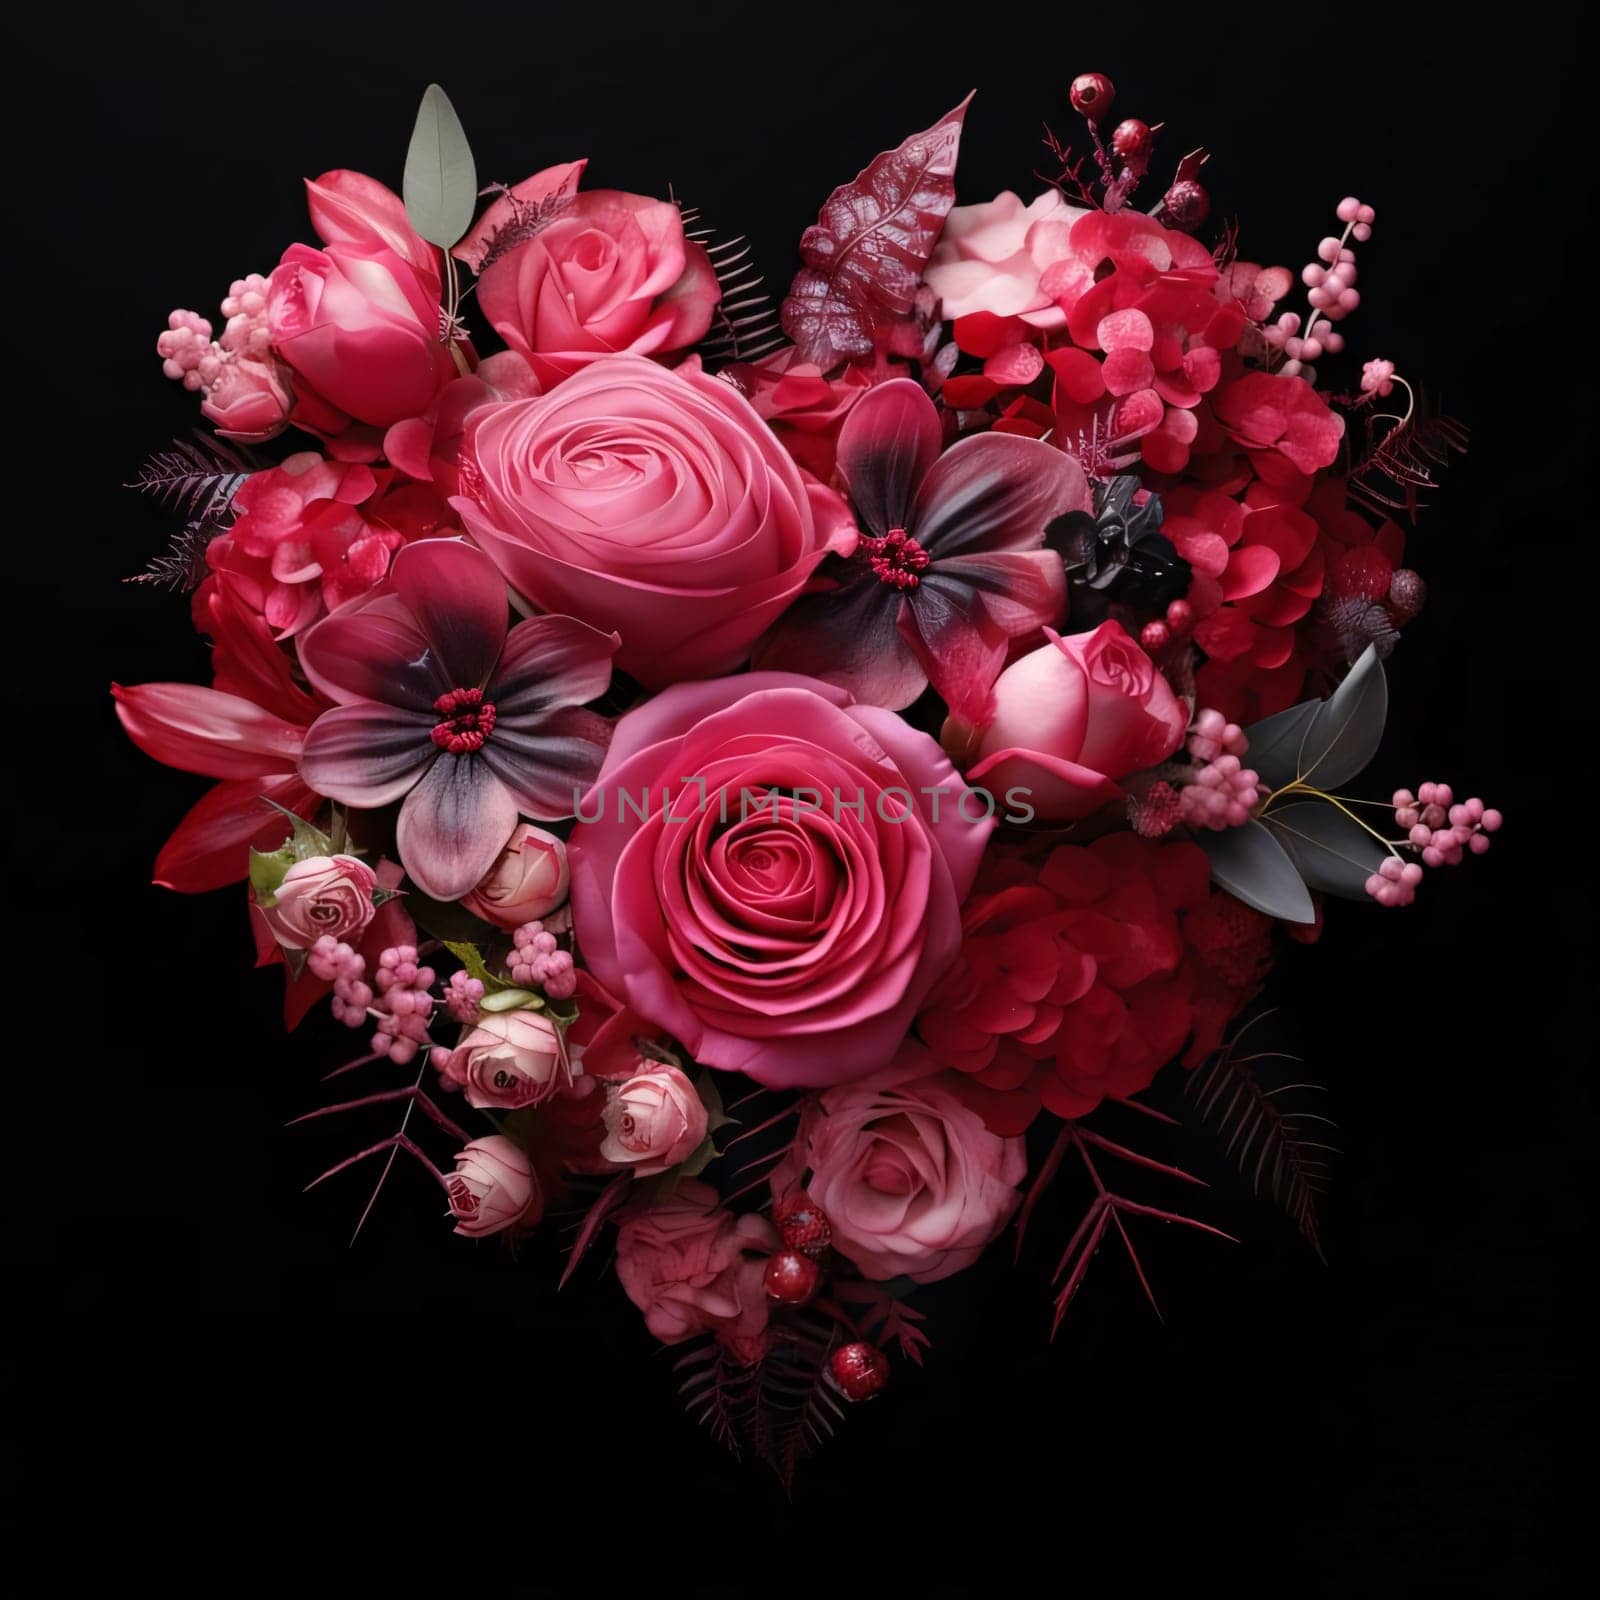 Bouquet of red pink flowers forming a heart black background. Flowering flowers, a symbol of spring, new life. by ThemesS